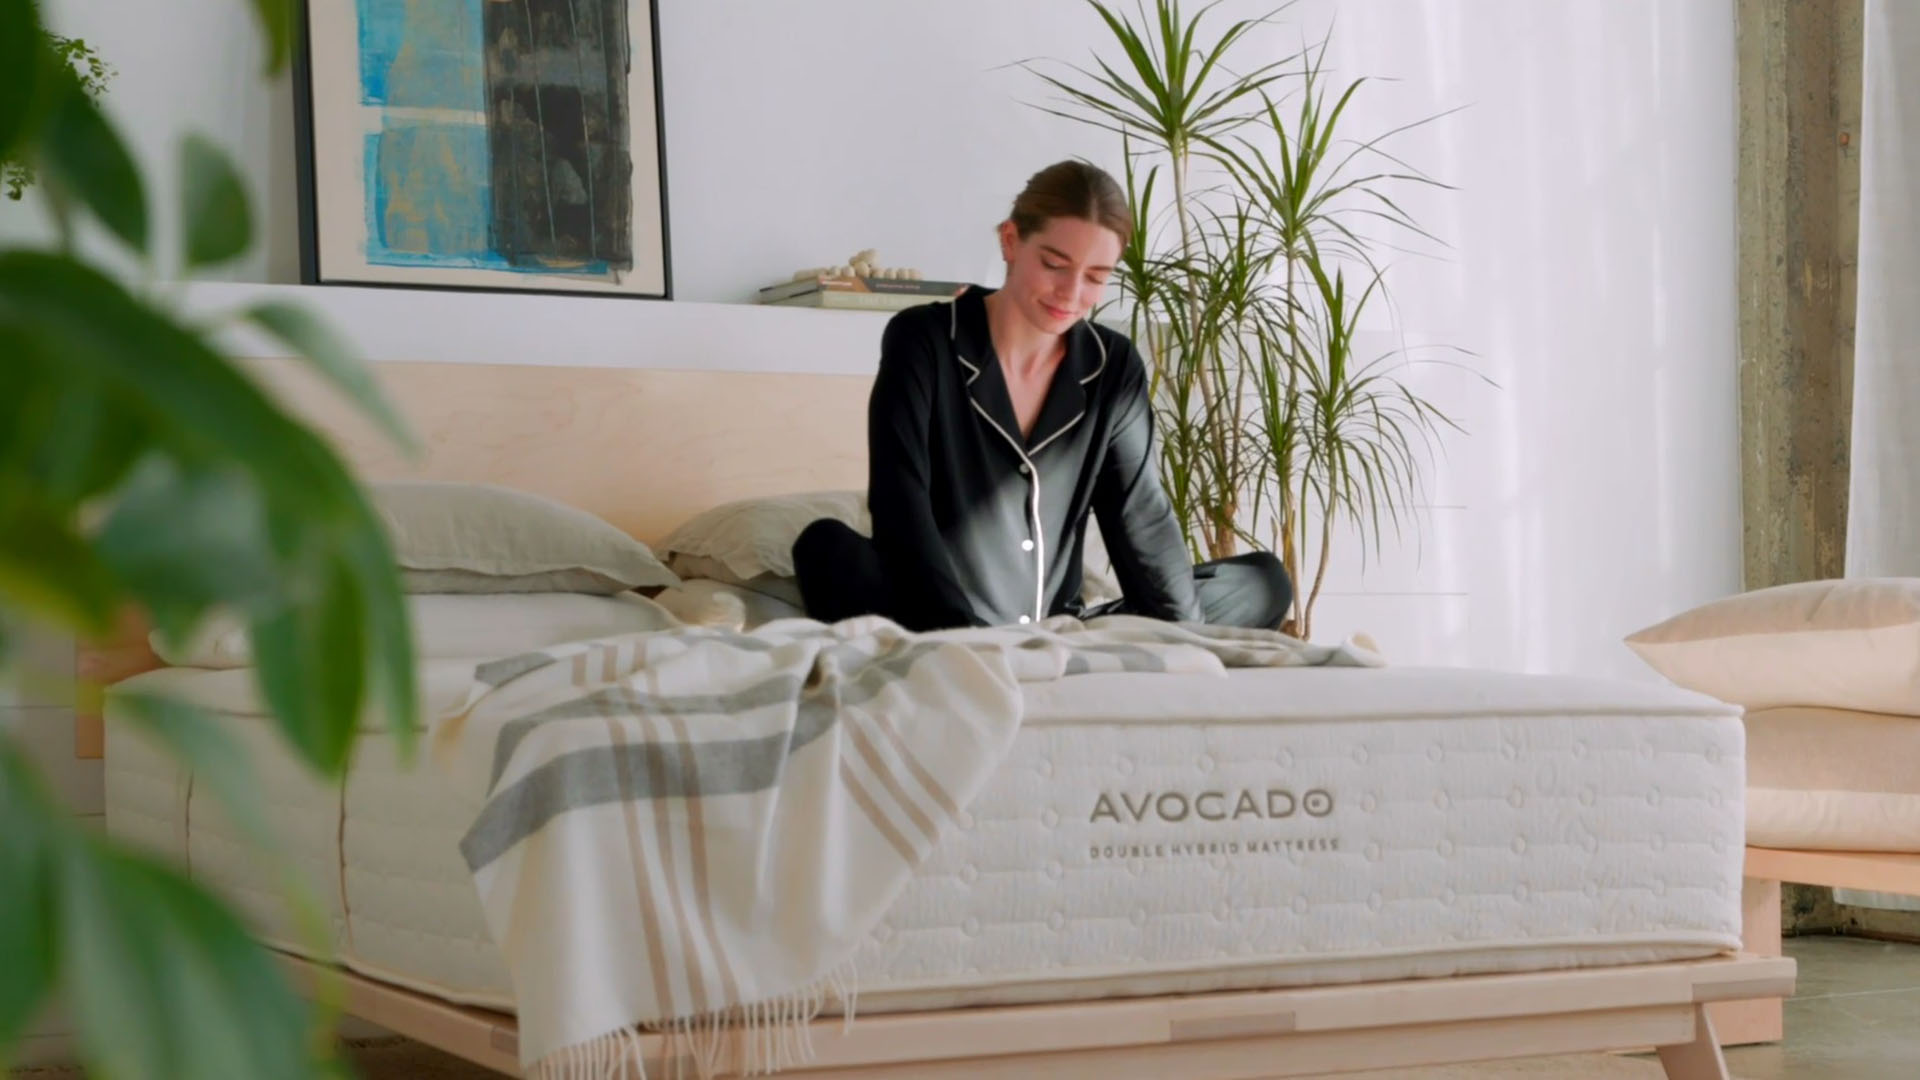 Where to buy Avocado Mattress in Linden, New Jersey